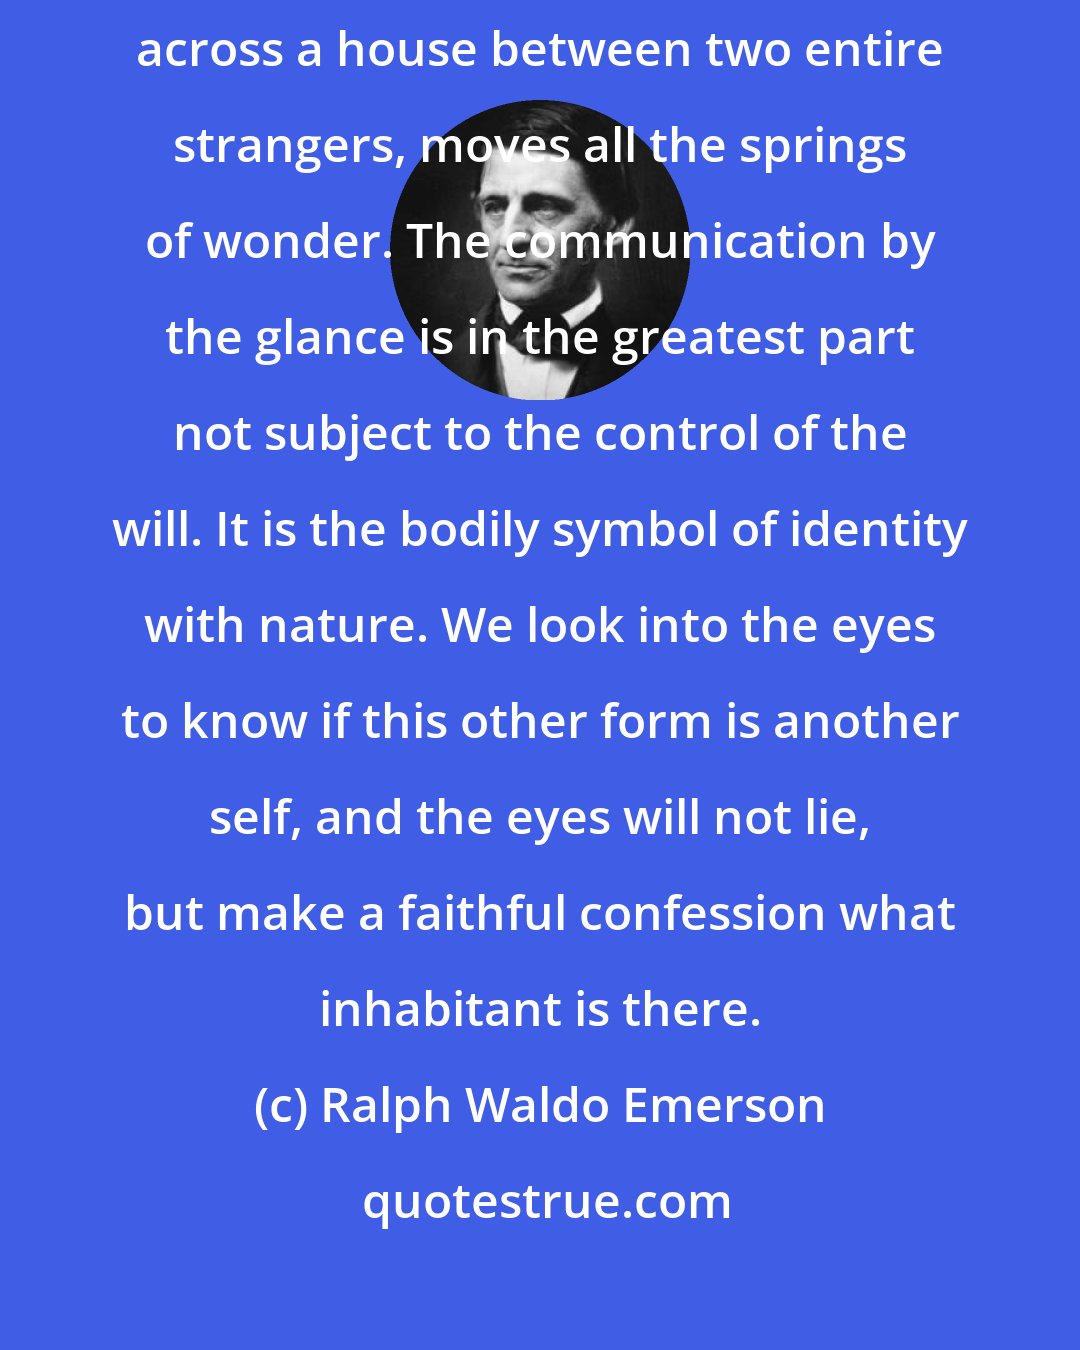 Ralph Waldo Emerson: The glance is natural magic. The mysterious communication established across a house between two entire strangers, moves all the springs of wonder. The communication by the glance is in the greatest part not subject to the control of the will. It is the bodily symbol of identity with nature. We look into the eyes to know if this other form is another self, and the eyes will not lie, but make a faithful confession what inhabitant is there.